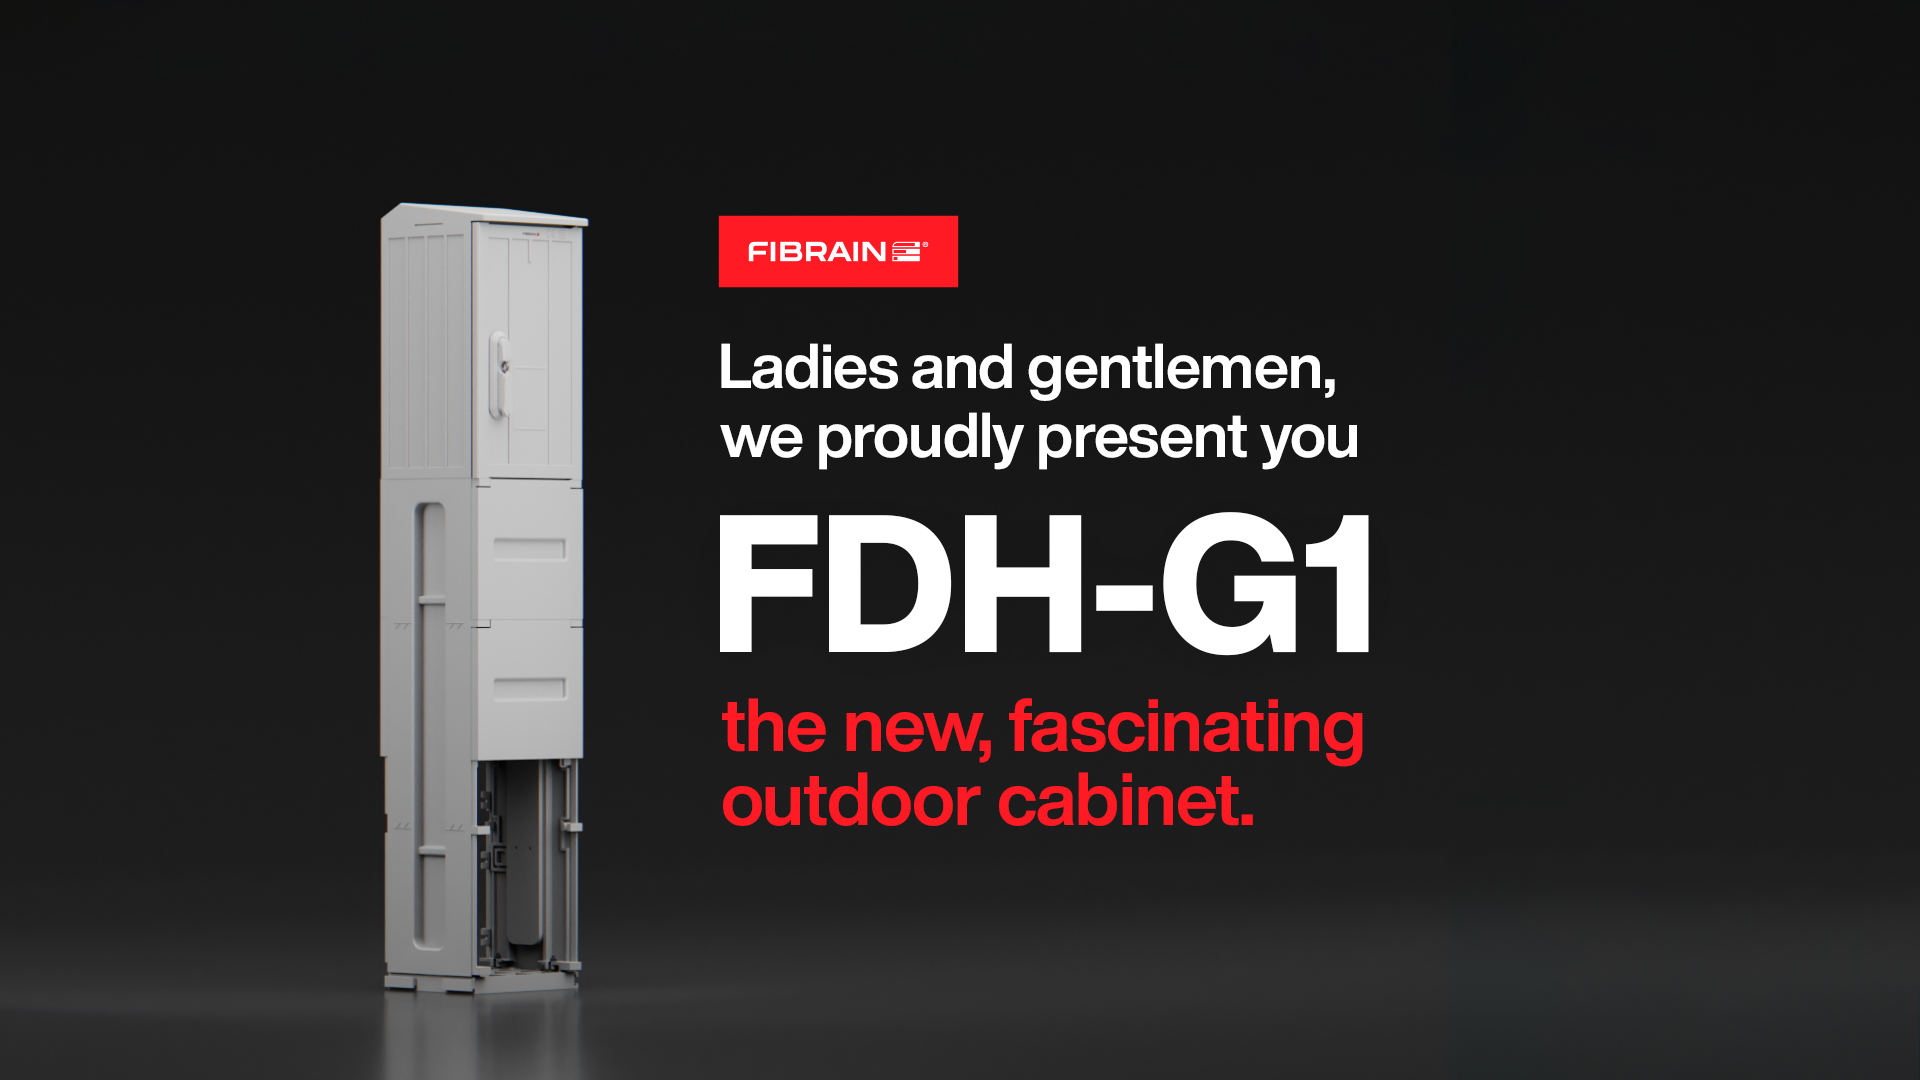 FIBRAIN has just launched a new series of outdoor cabinets!